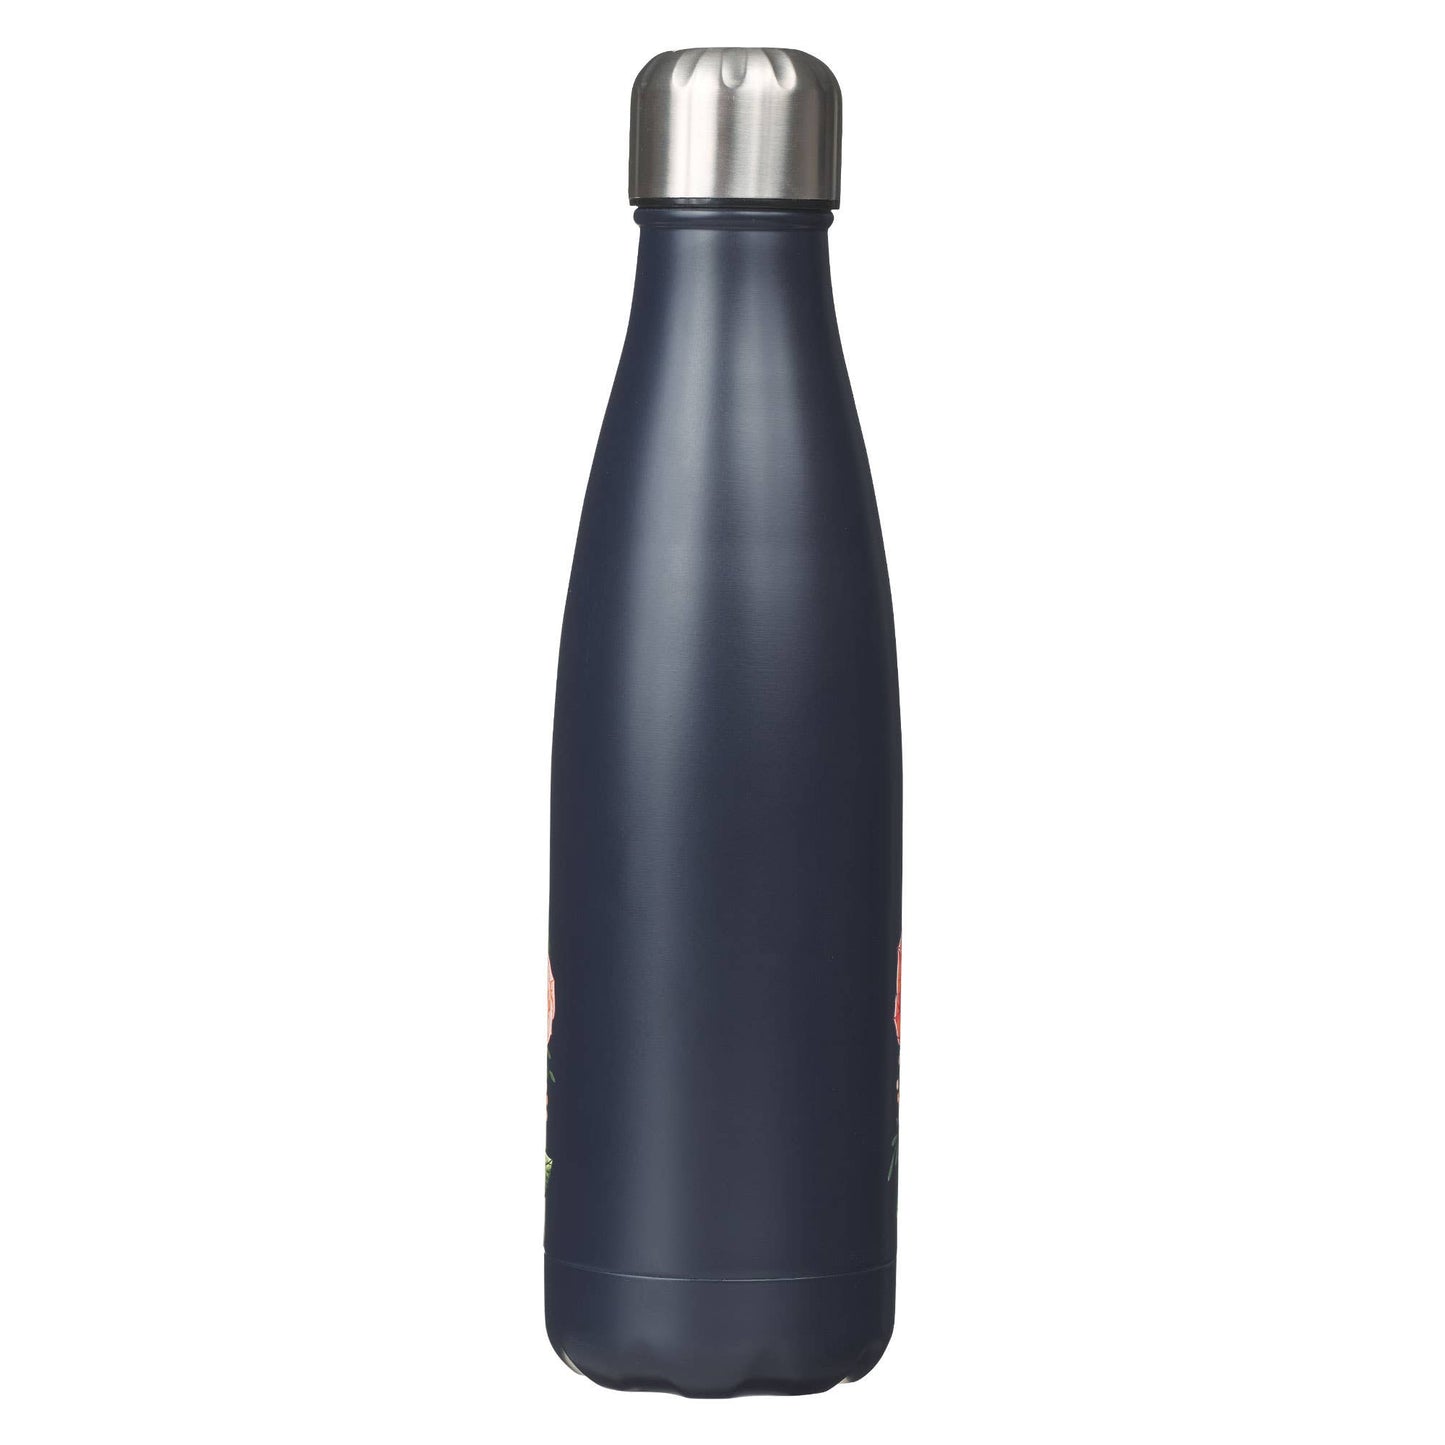 Strength & Dignity Stainless Steel Water Bottle